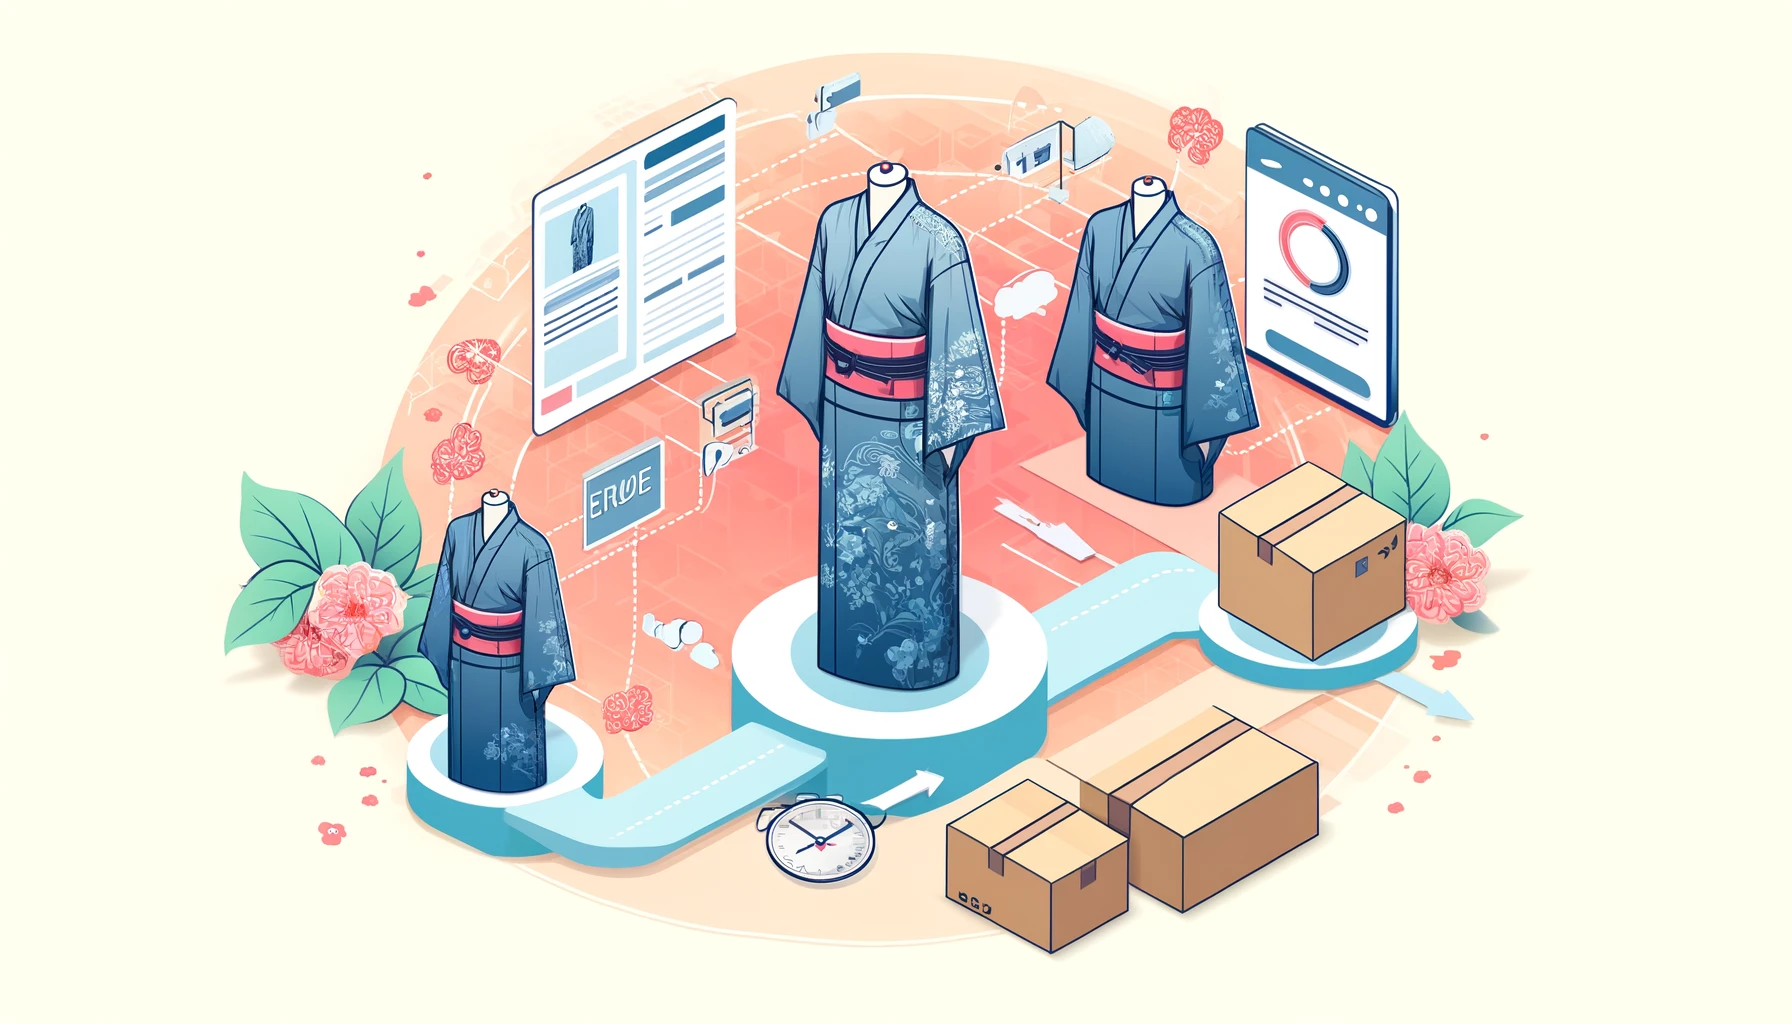 An illustration showing the process from order to delivery for GRL yukatas. The image includes a timeline or sequence of steps, from placing an order online to receiving the yukata at home. The background features a mix of digital and real-world elements, with 'GRL' prominently displayed.